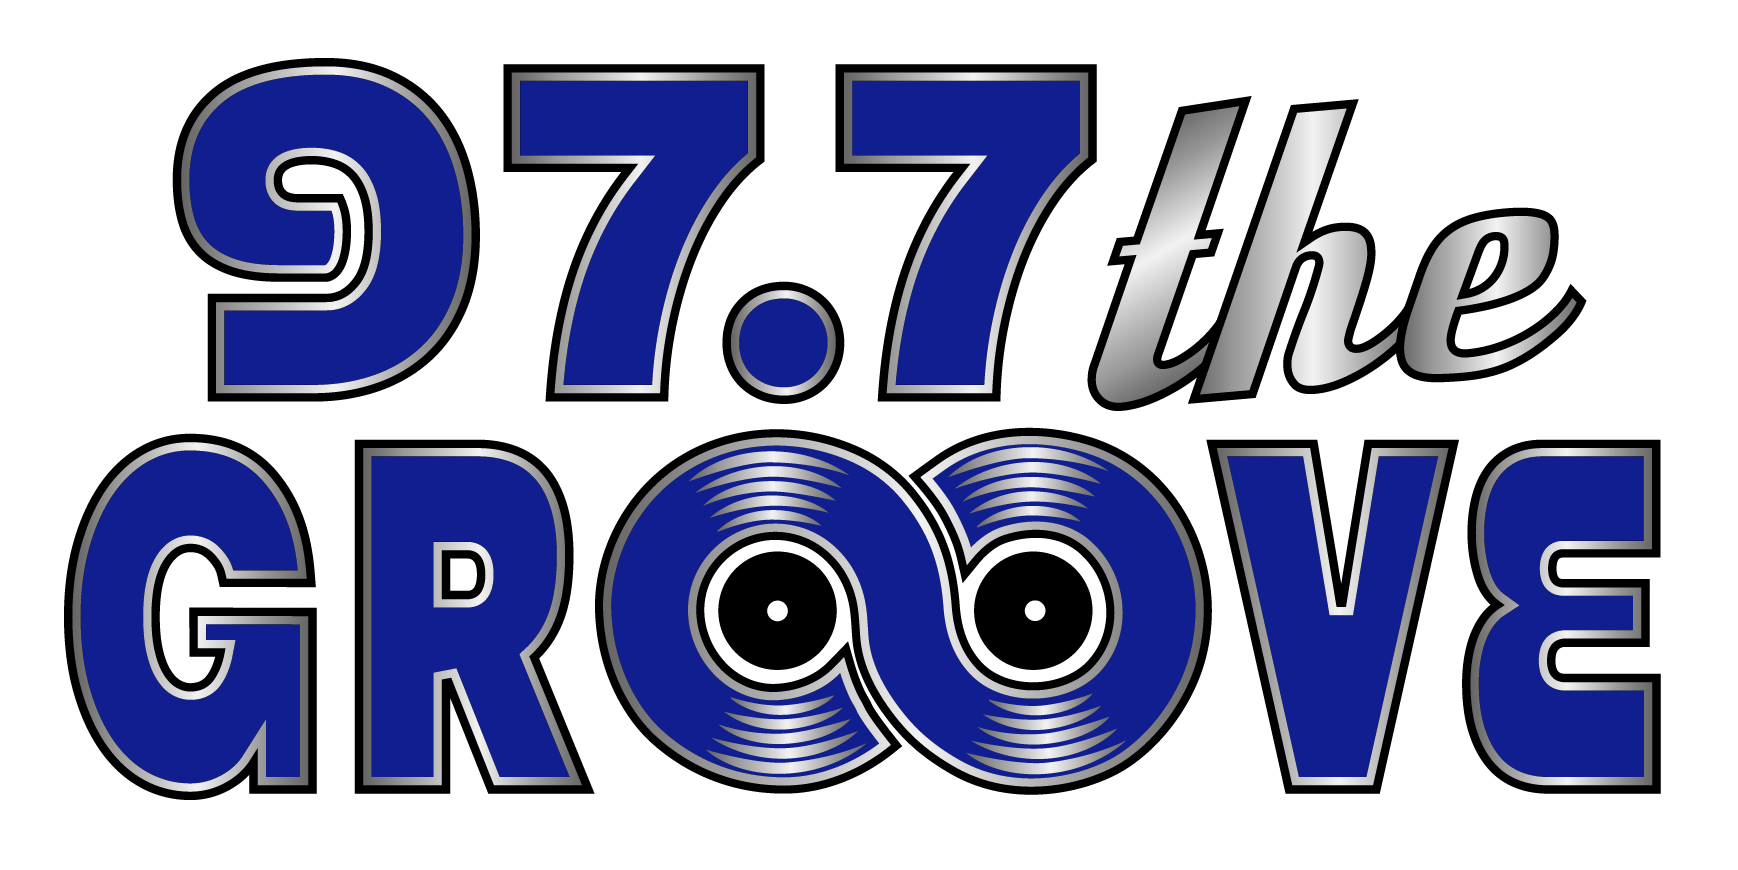 97.7 The Groove